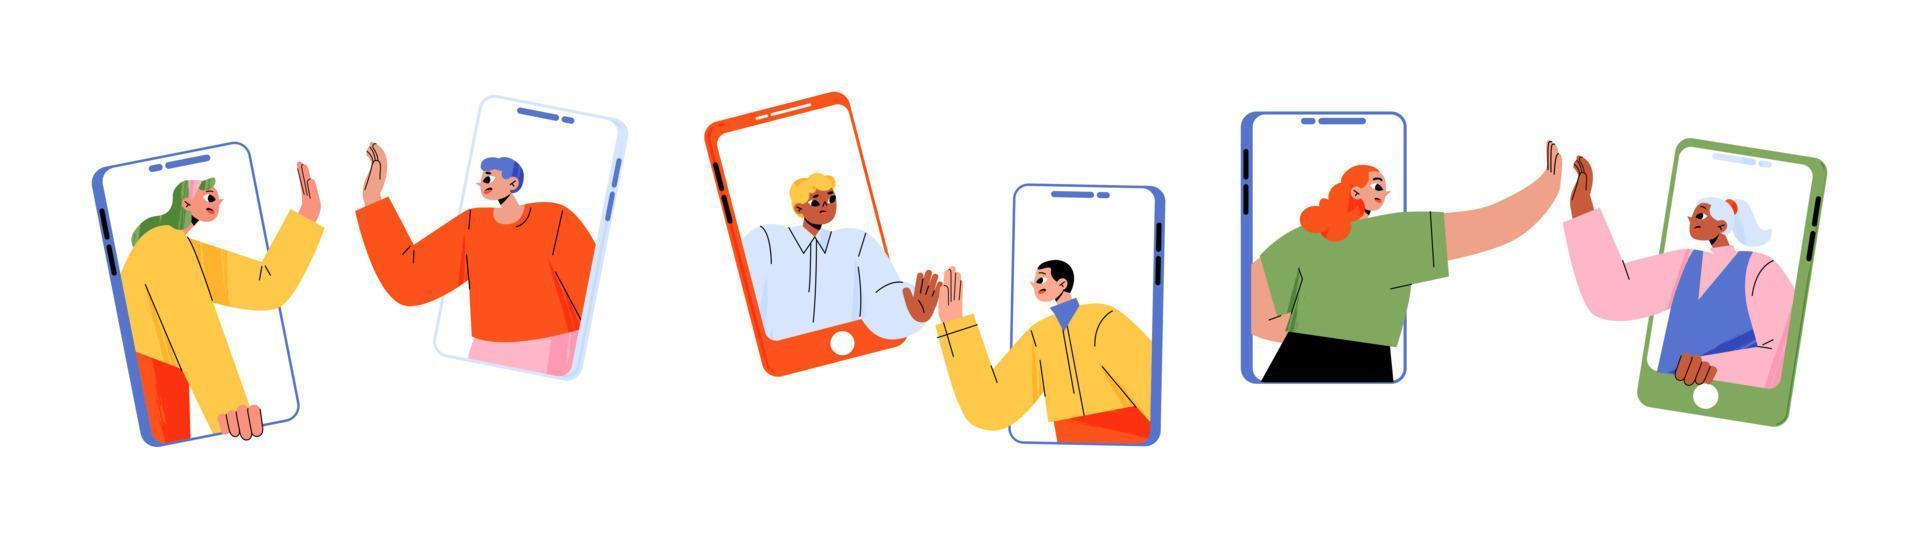 People on phones give high five, video call vector